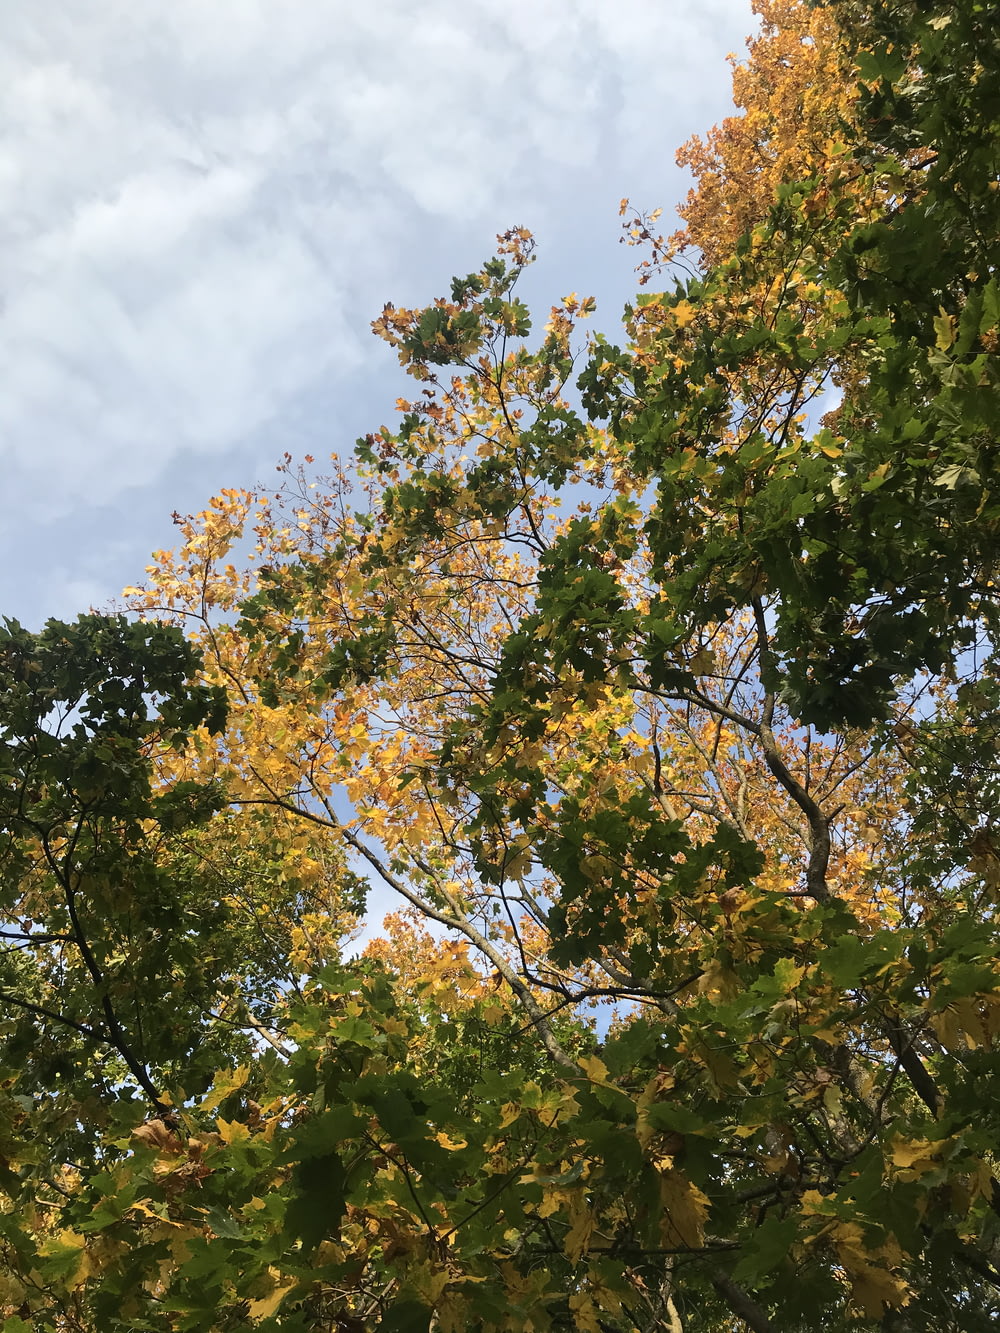 green and yellow leaf tree under white clouds and blue sky during daytime